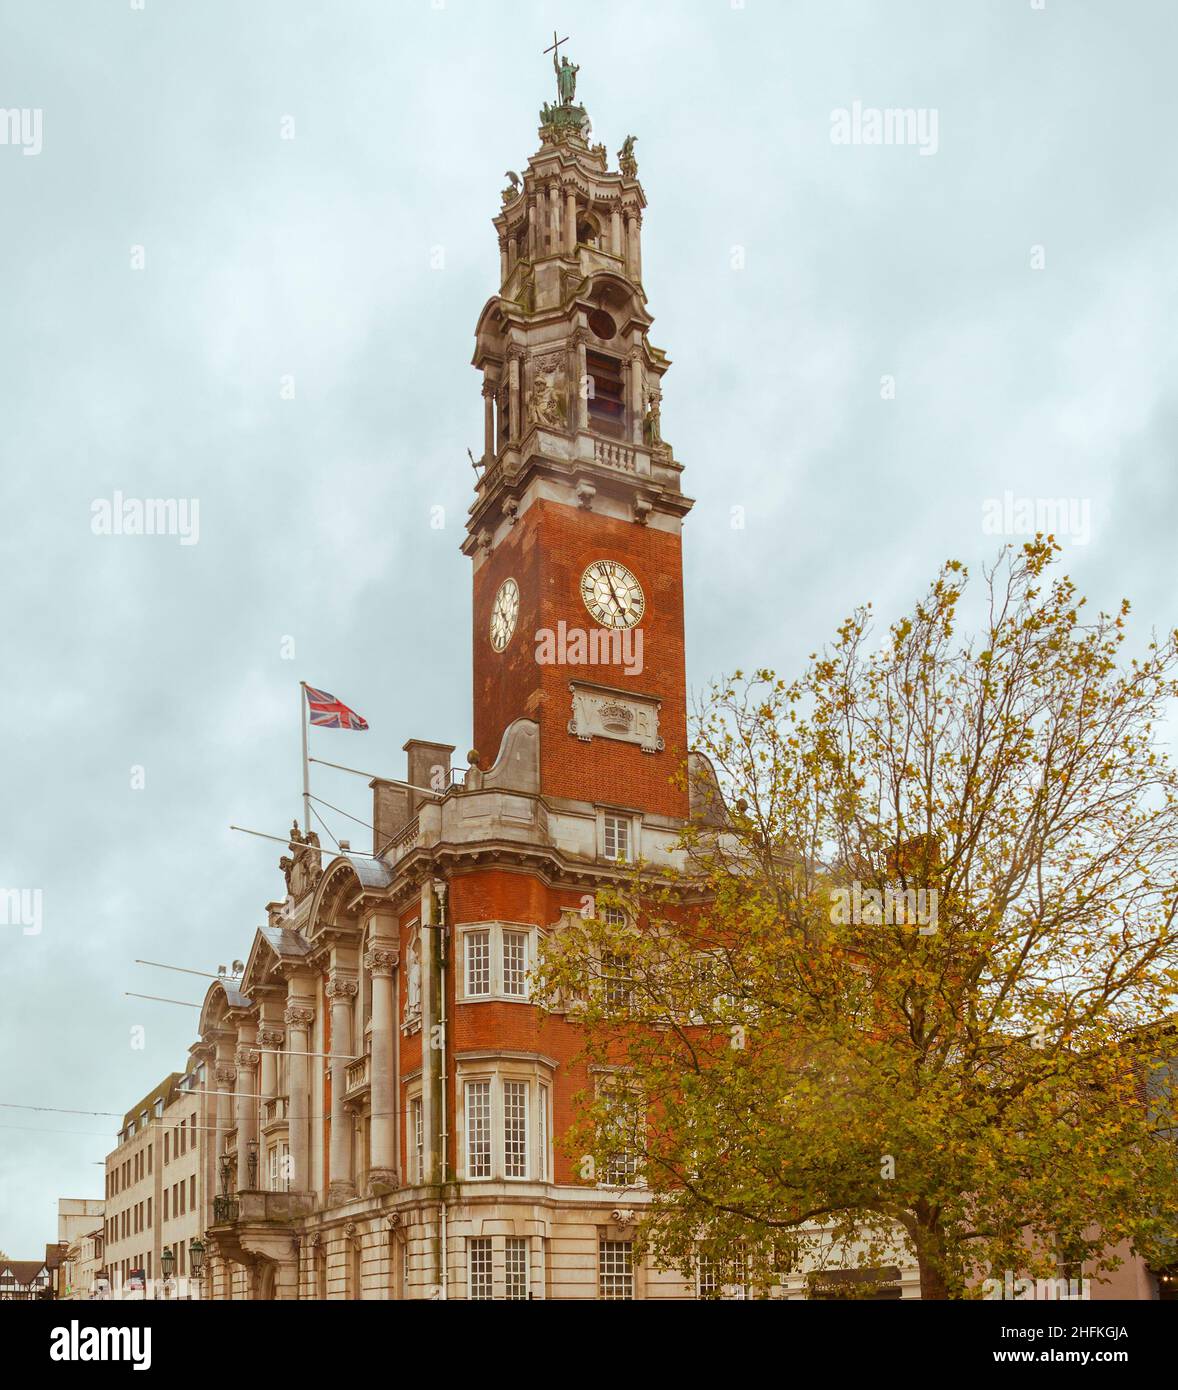 Colchester town hall stands in Colchester High street. It is a Grade 1 listed building and is the headquarters of Colchester Borough Council. Stock Photo